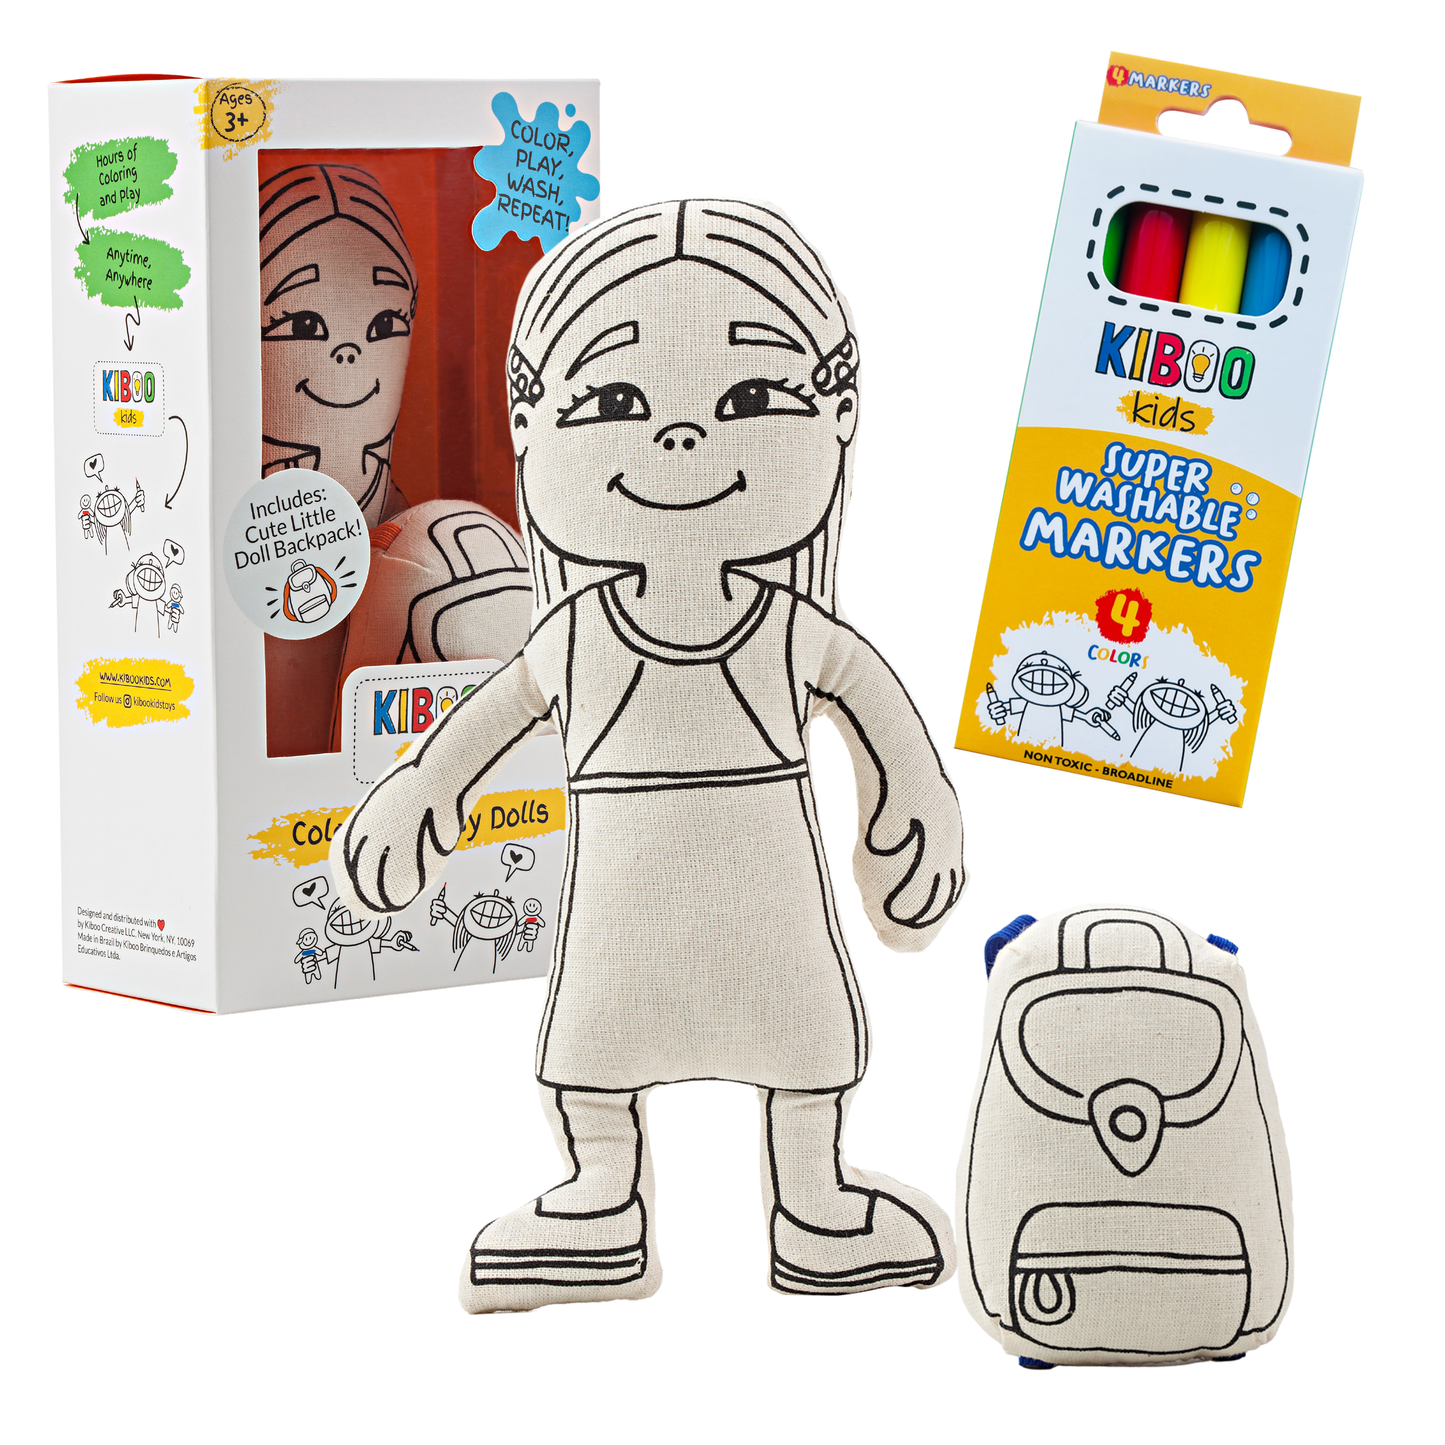 Kiboo Kids: Girl with Long Hair - Colorable and Washable Doll for Creative Play